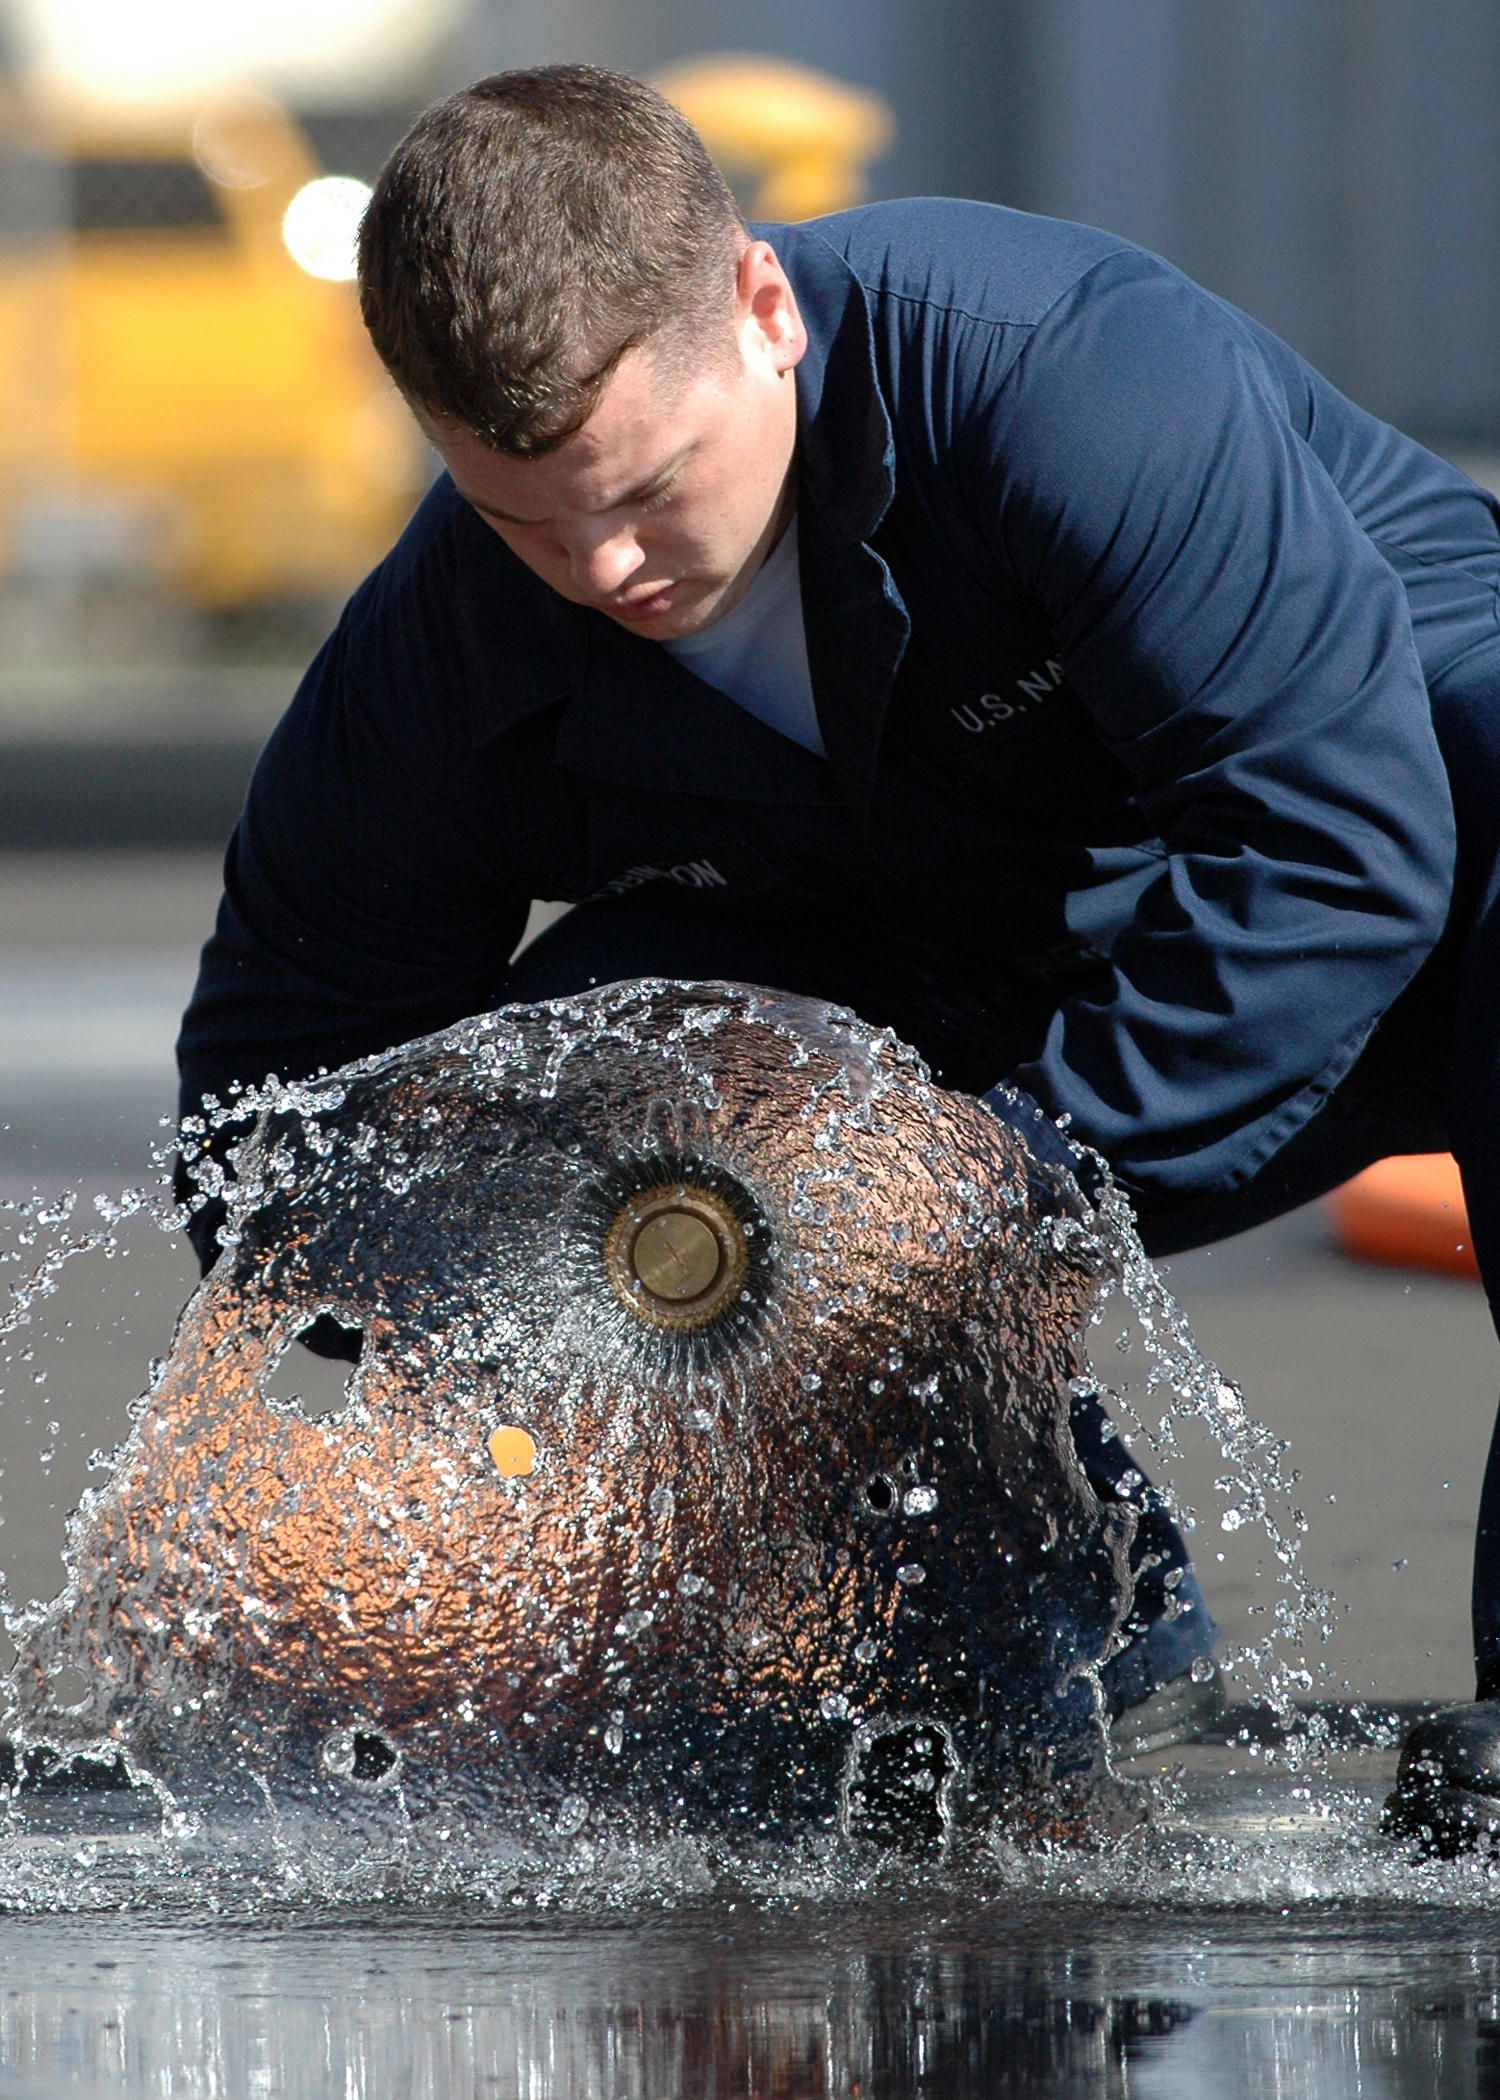 US Navy 051006-N-3019M-003 Damage Controlman Fireman Jason Robinson, assigned to the guided missile destroyer USS Paul Hamilton (DDG 60), opens the nozzle on a fire hose